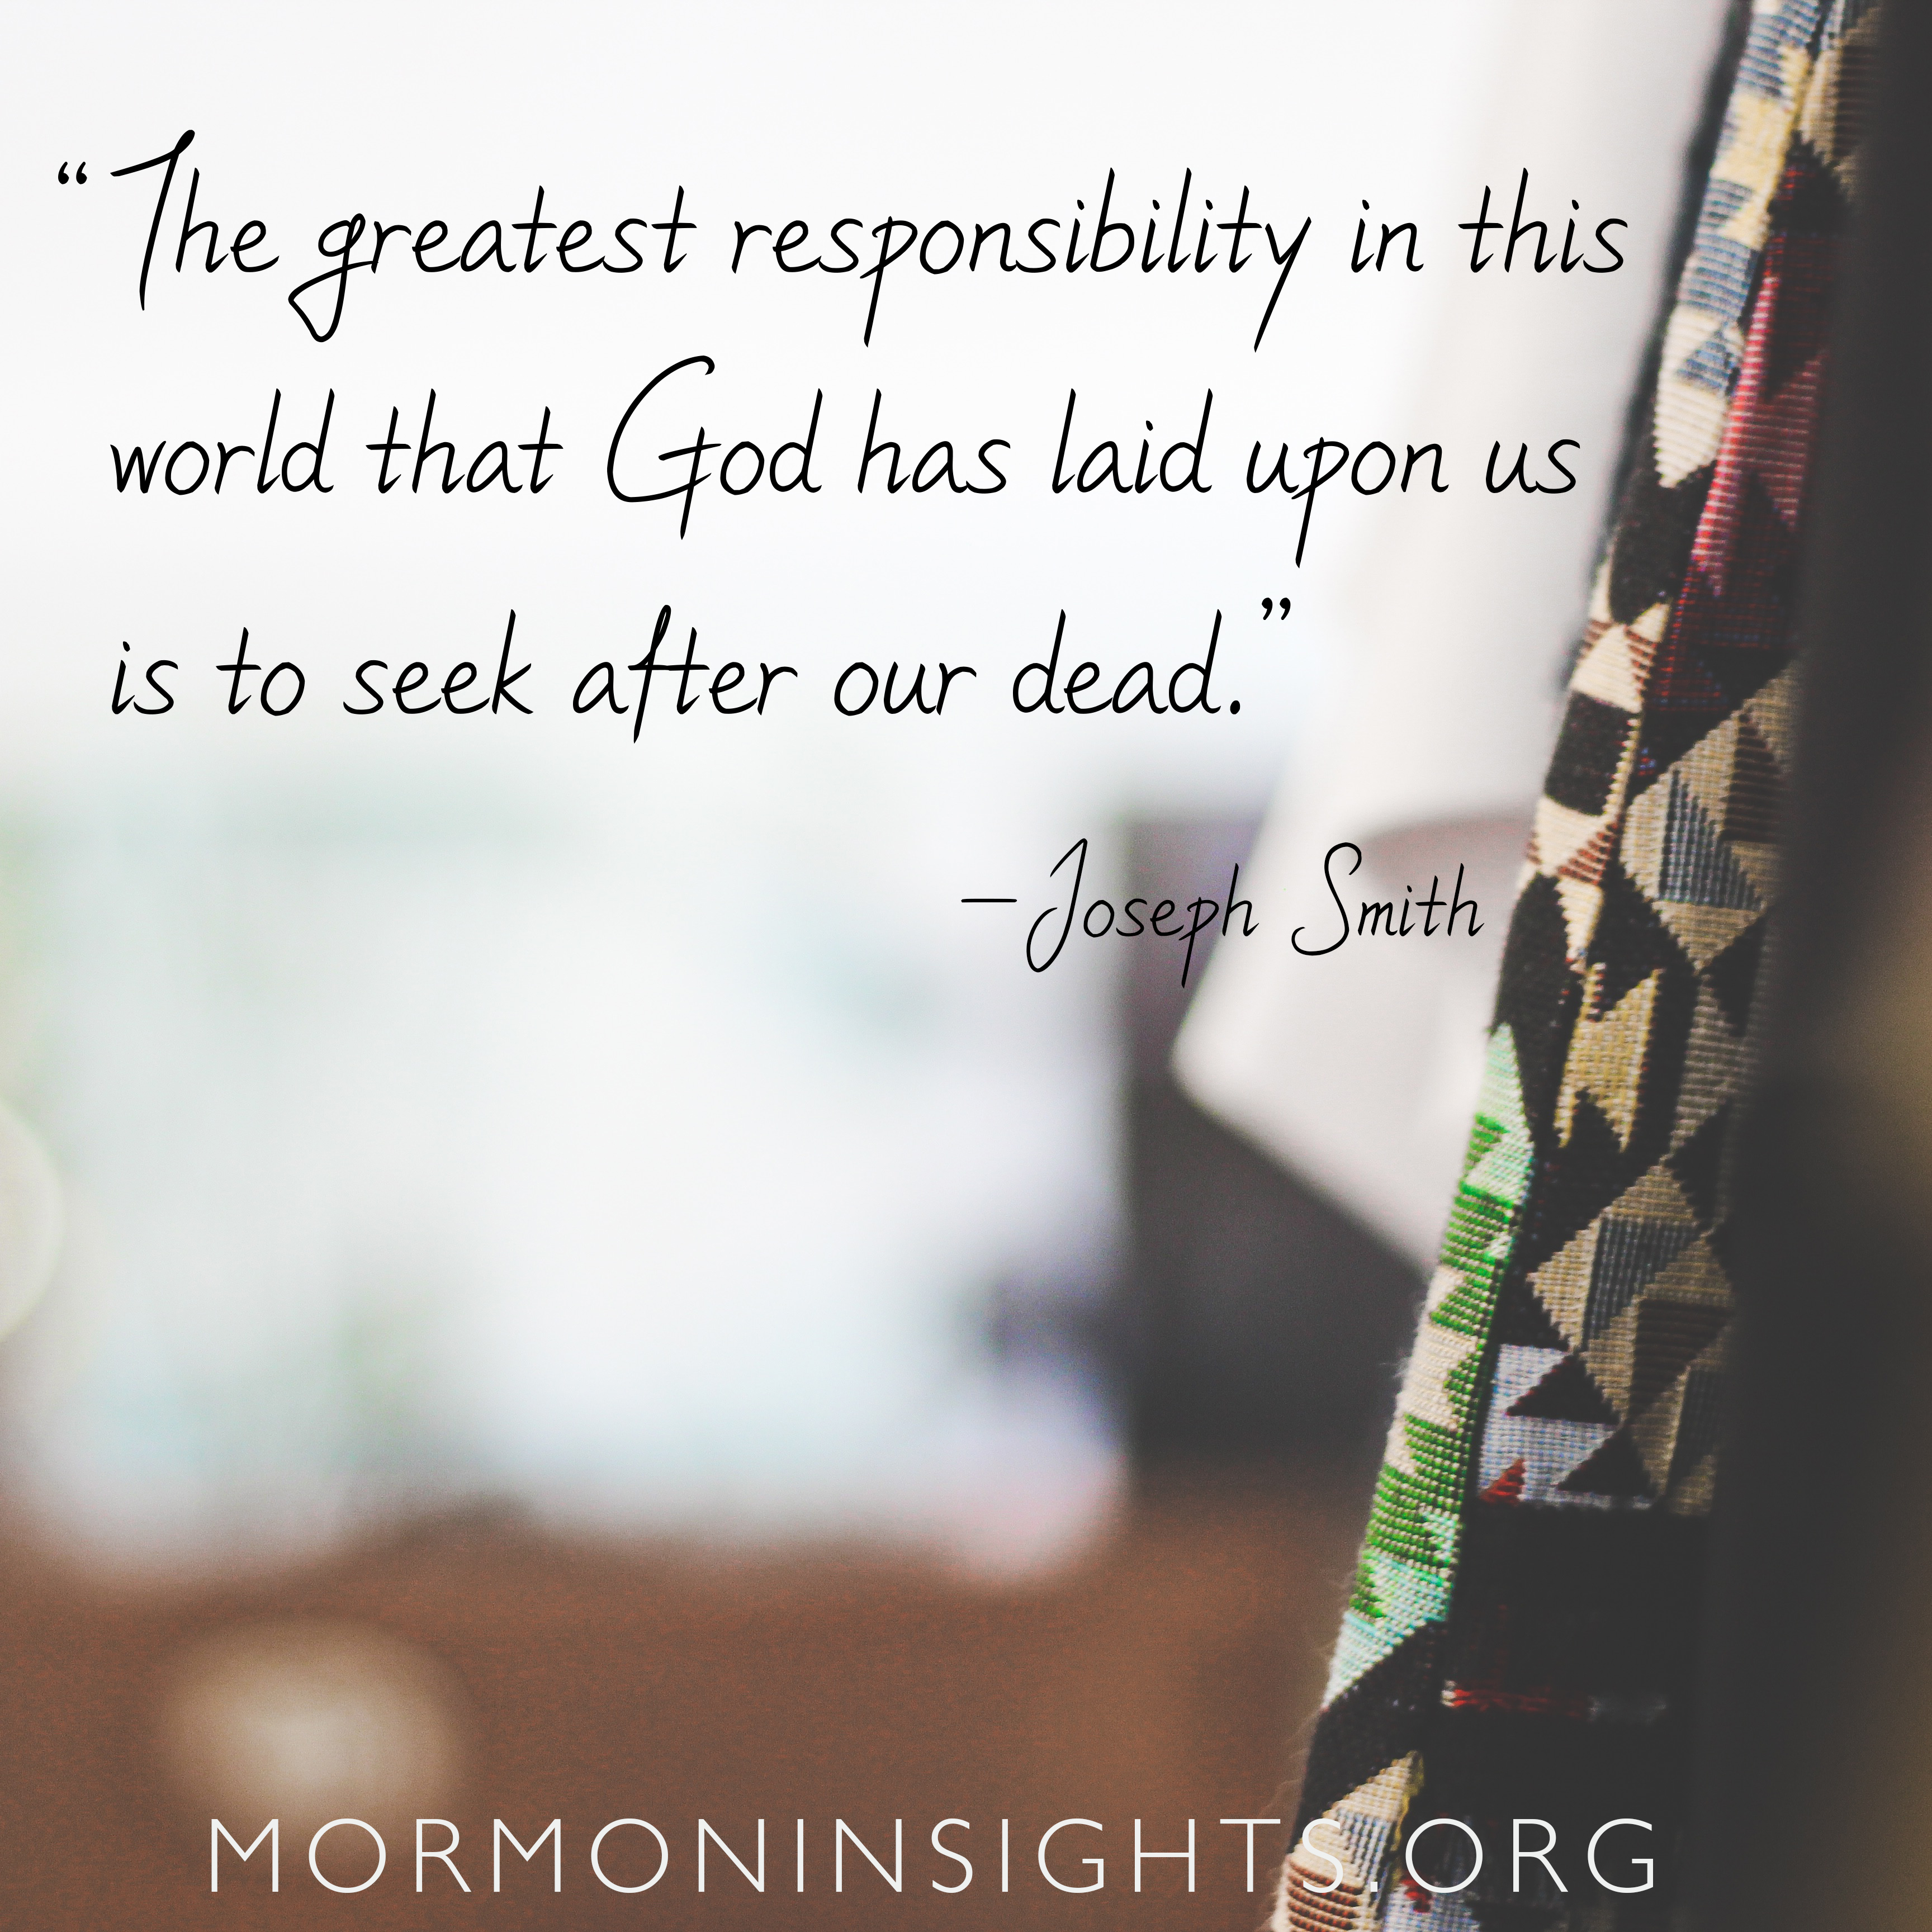 "The greatest responsibility in this world that God has laid upon us is to seek after our dead." --Joseph Smith